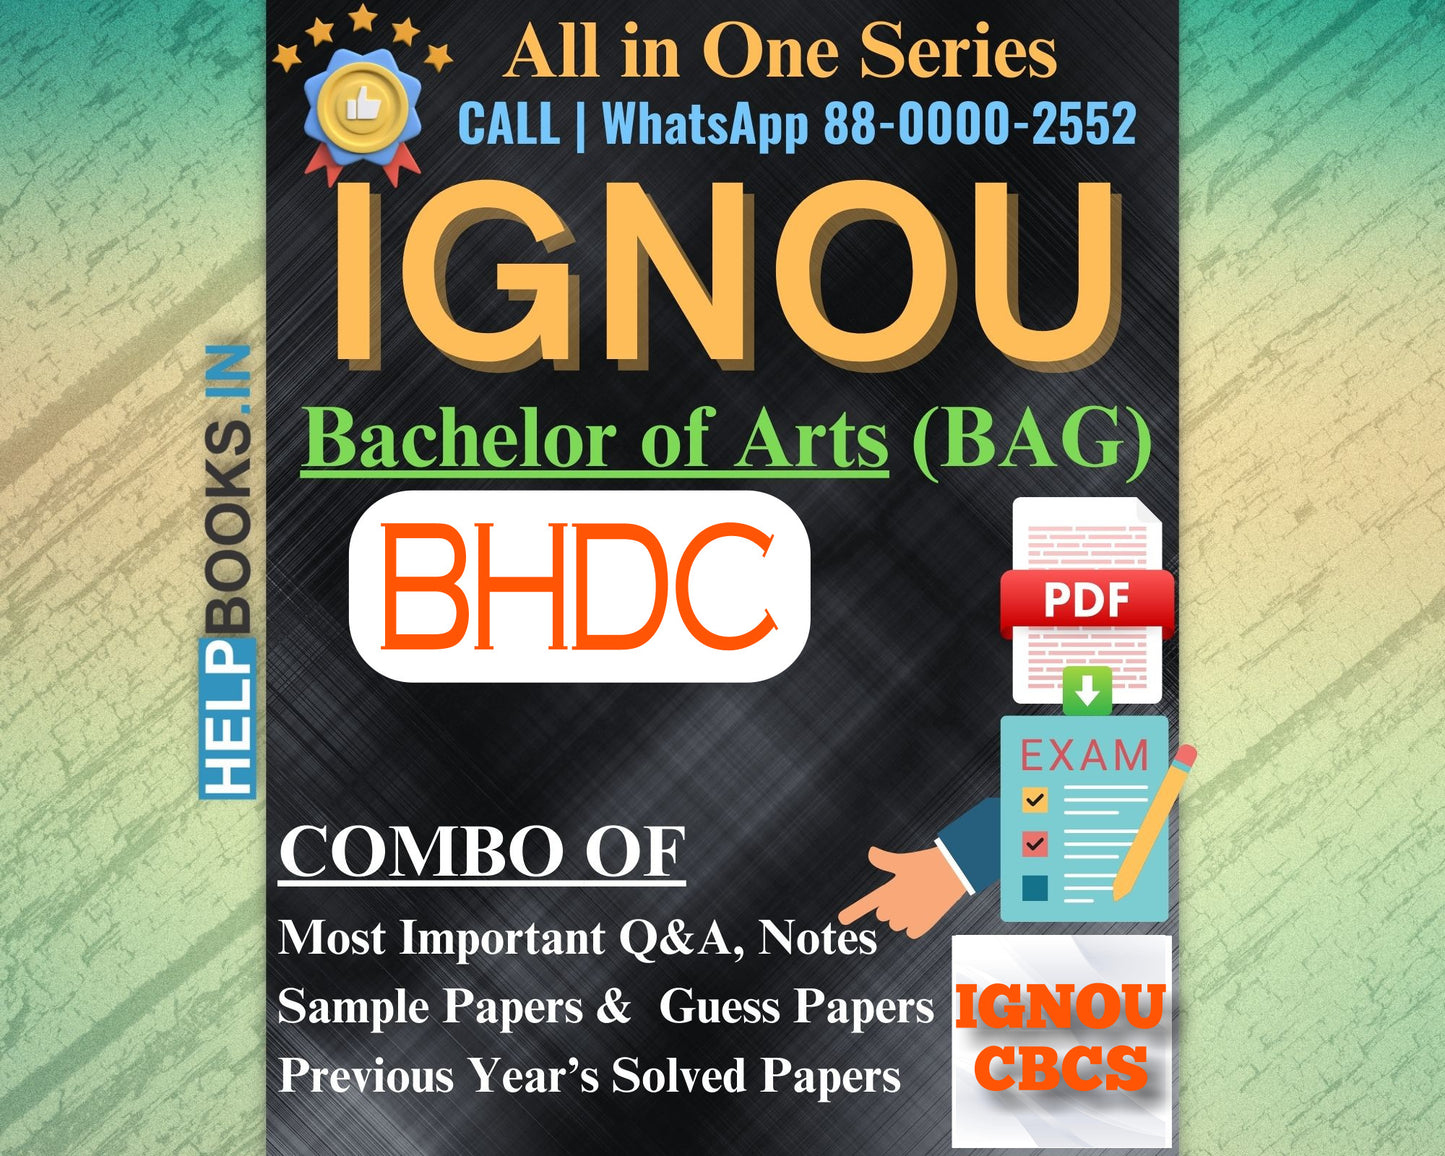 IGNOU BAG Online Study Package: Bachelor of Arts (BA) - Previous Year’s Solved Papers, Q&A, Exam Notes, Sample Papers, Guess Papers-BHDC131, BHDC132, BHDC133, BHDC134